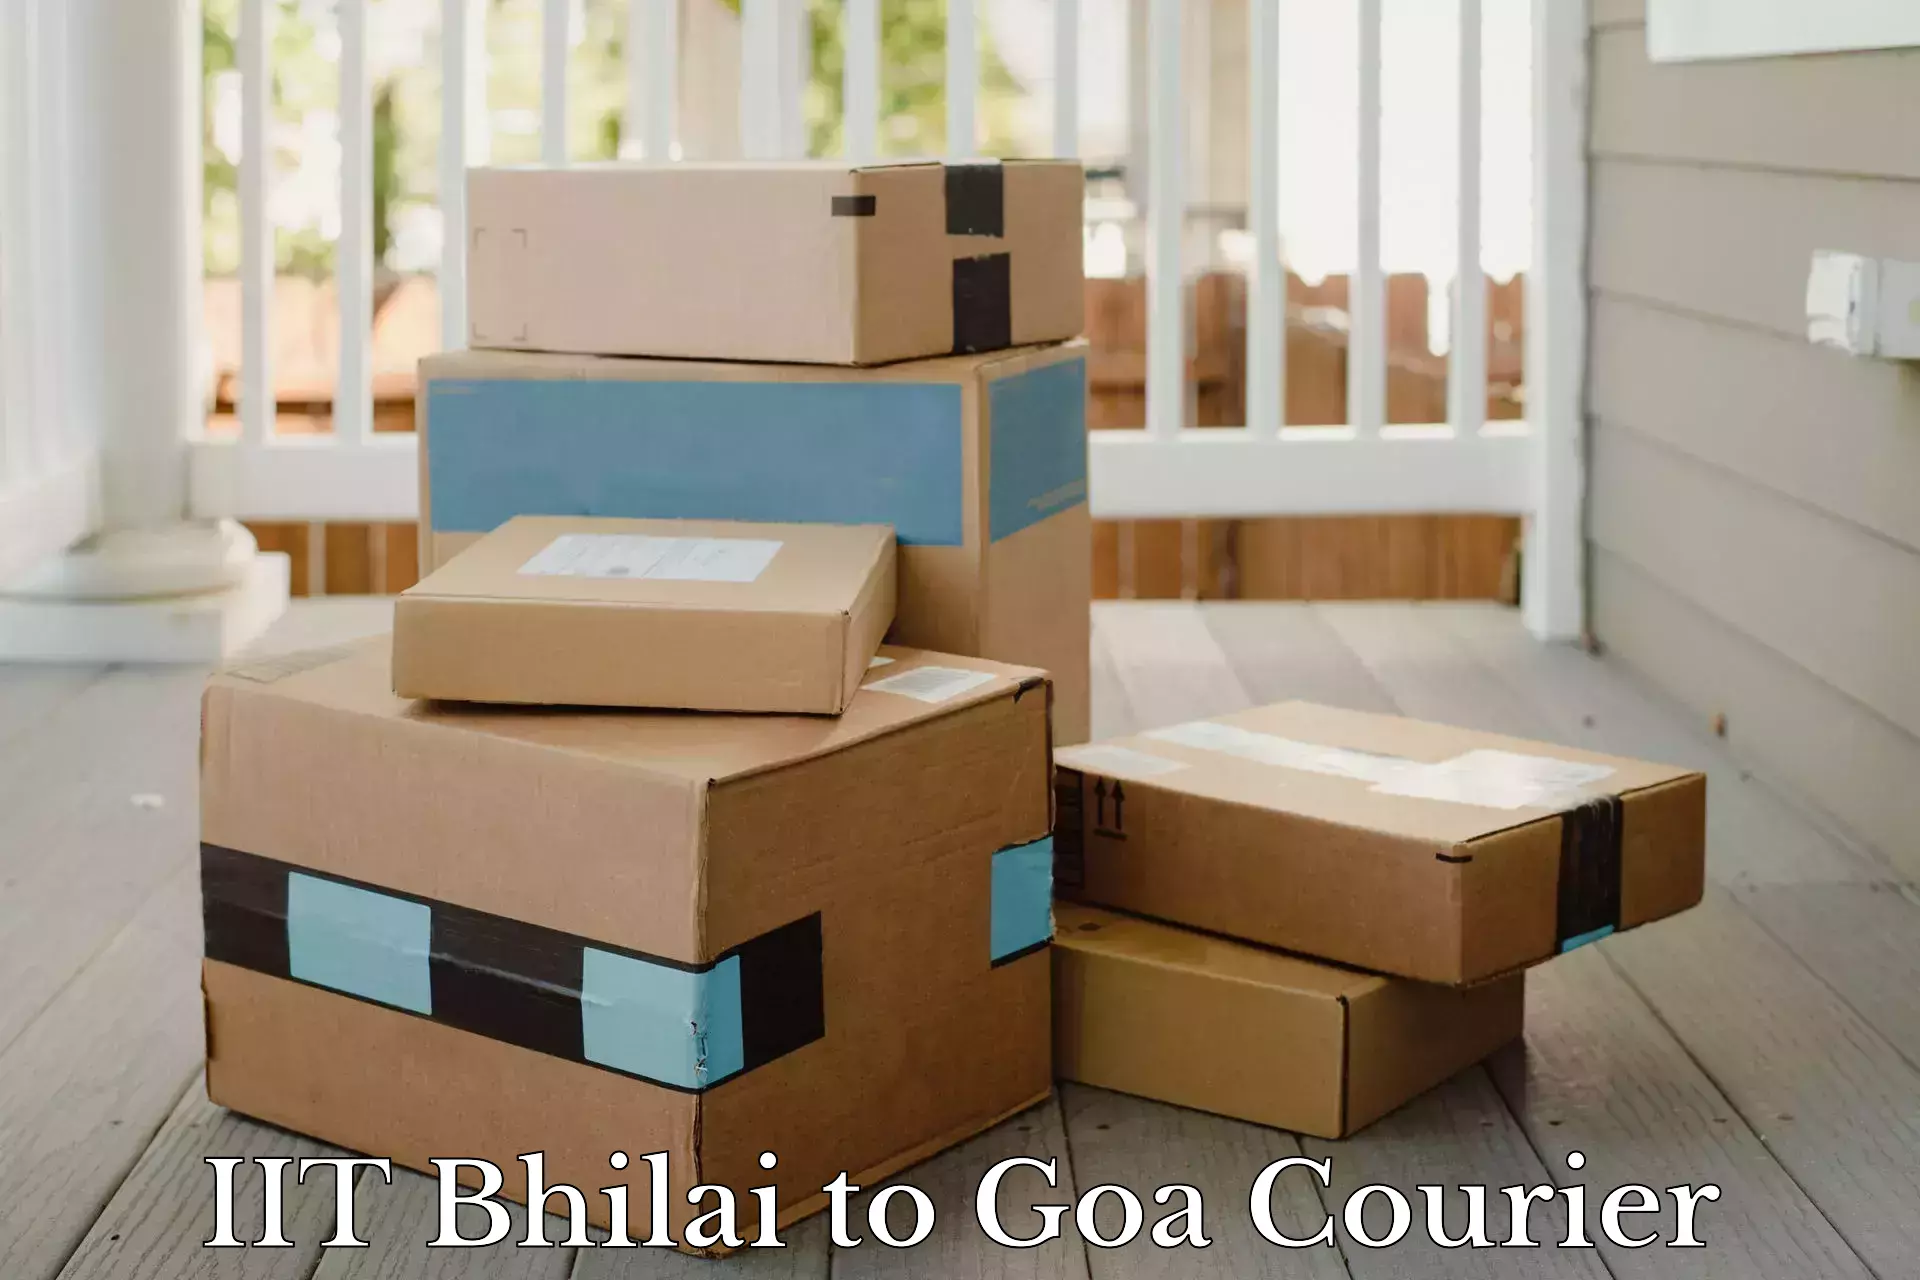 Personal courier services in IIT Bhilai to Goa